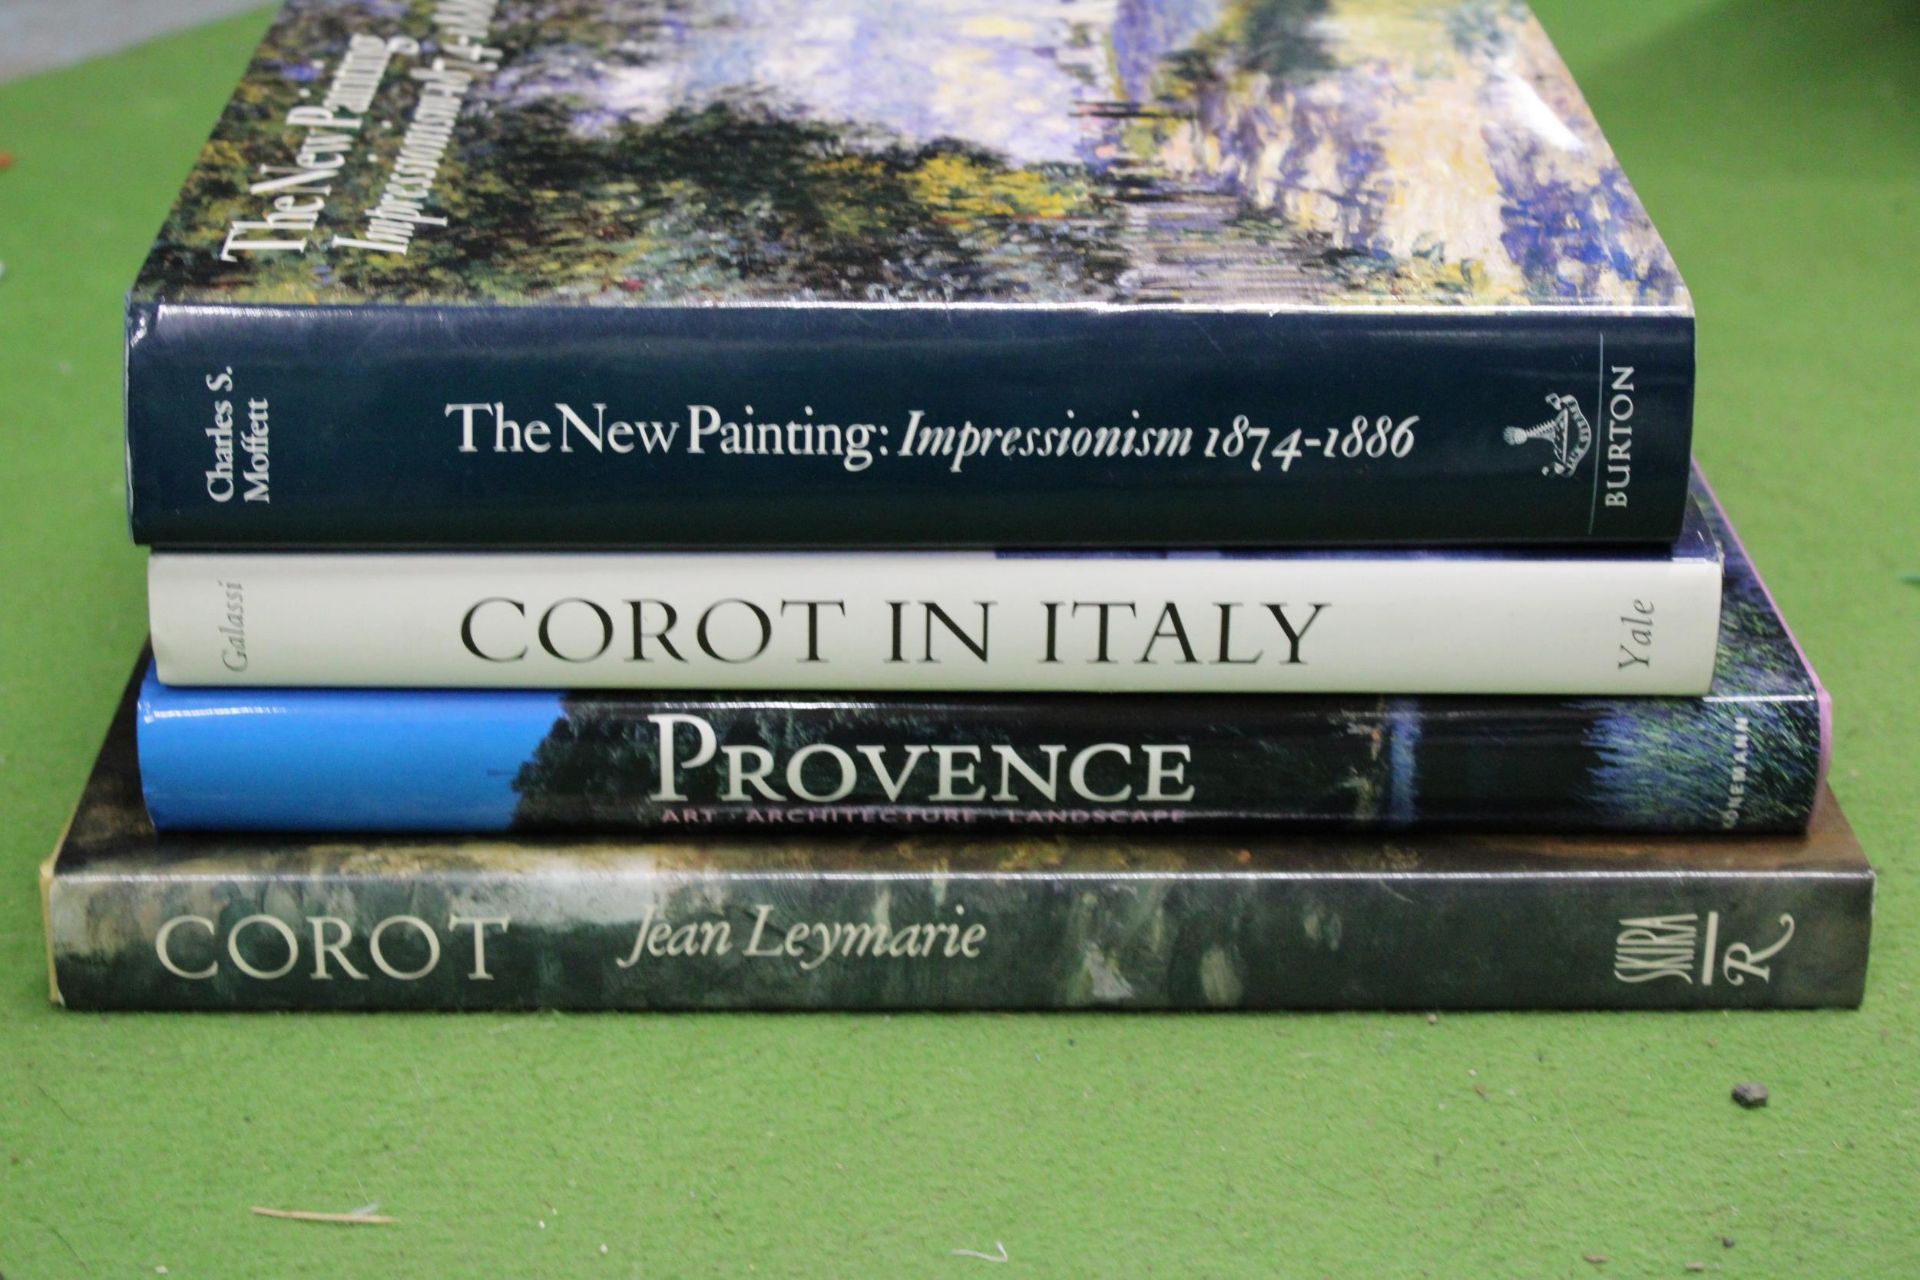 FOUR ART THEMED HARDBACK BOOKS TO INCLUDE IMPRESSIONISM 1874-1866, COROT IN ITALY, PROVENCE, ART, - Image 3 of 5